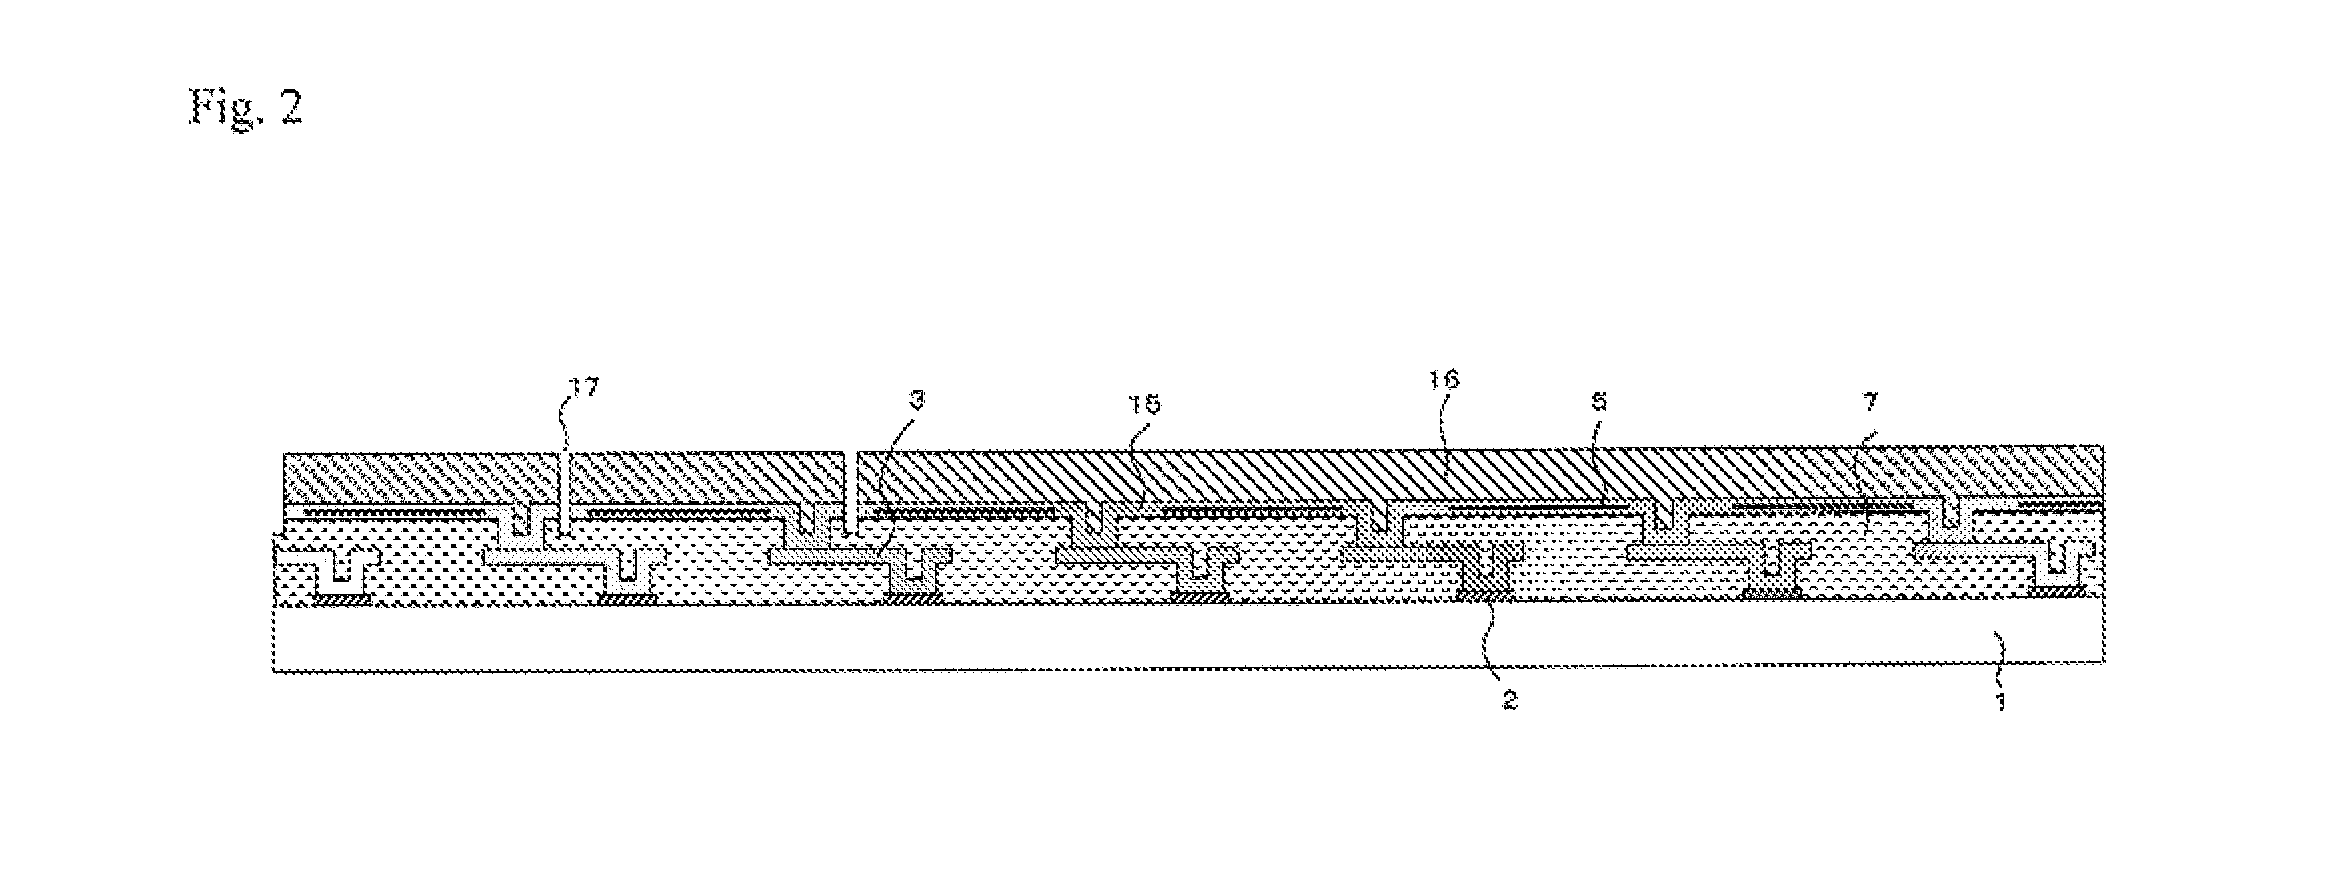 Thermal-type infrared solid-state image sensing device and method of manufacturing the same